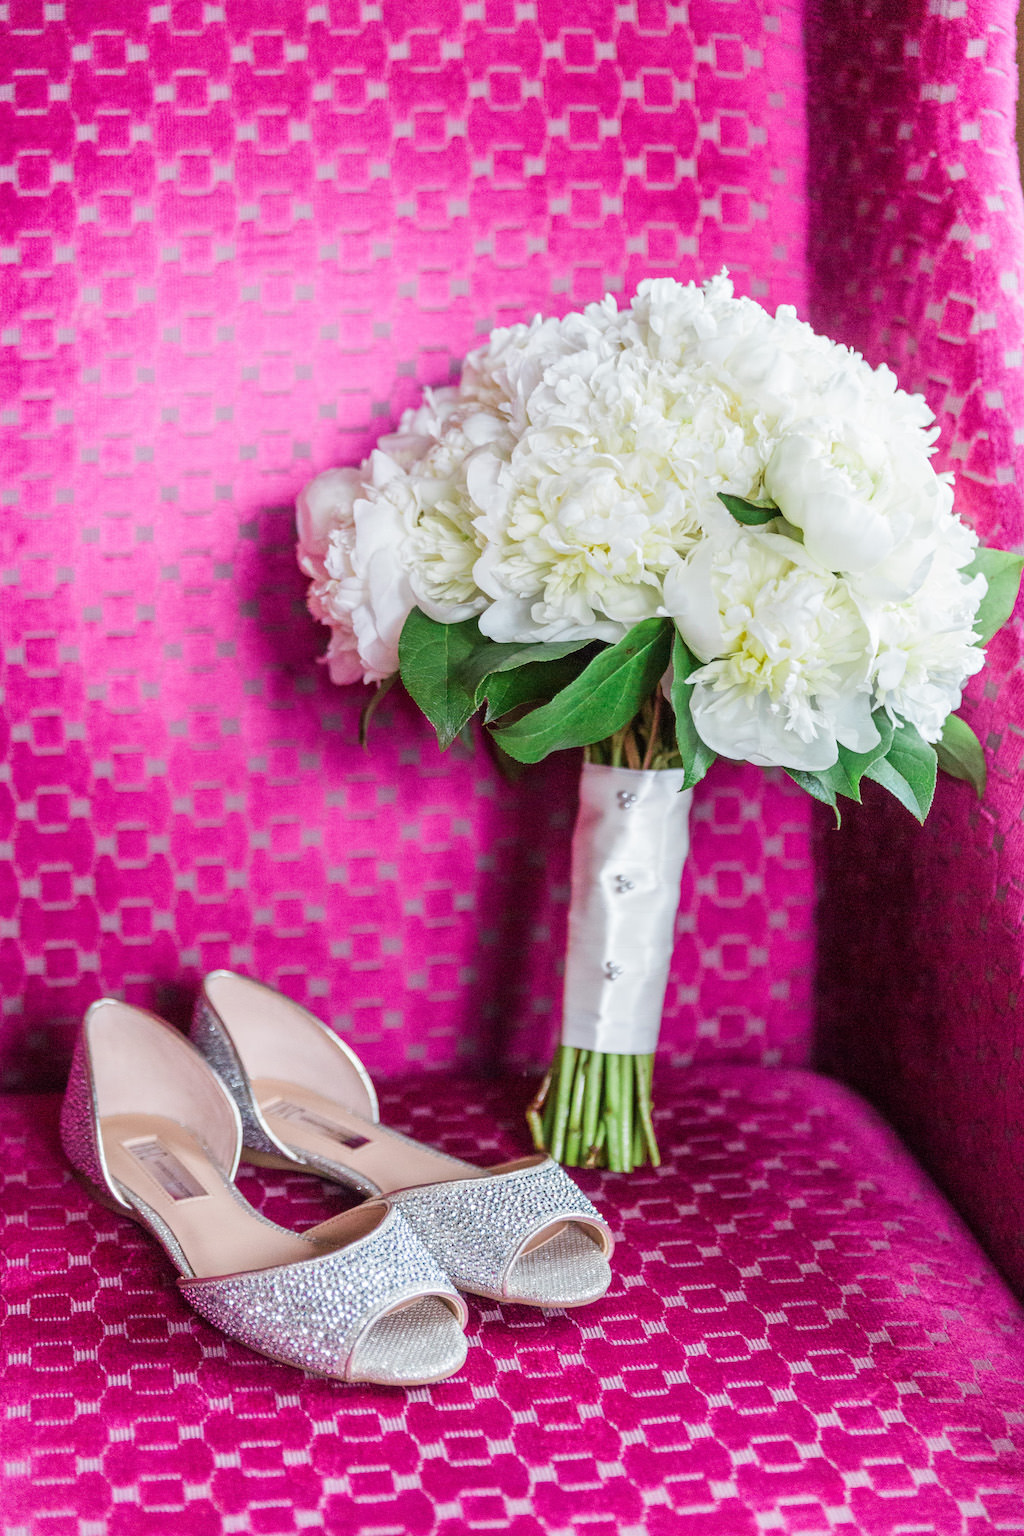 Glittery Jeweled Silver Peep Toe Flat Wedding Shoes with White Peony Bouquet with Greenery and White Ribbon | Tampa Bay Wedding Florist Cotton and Magnolia